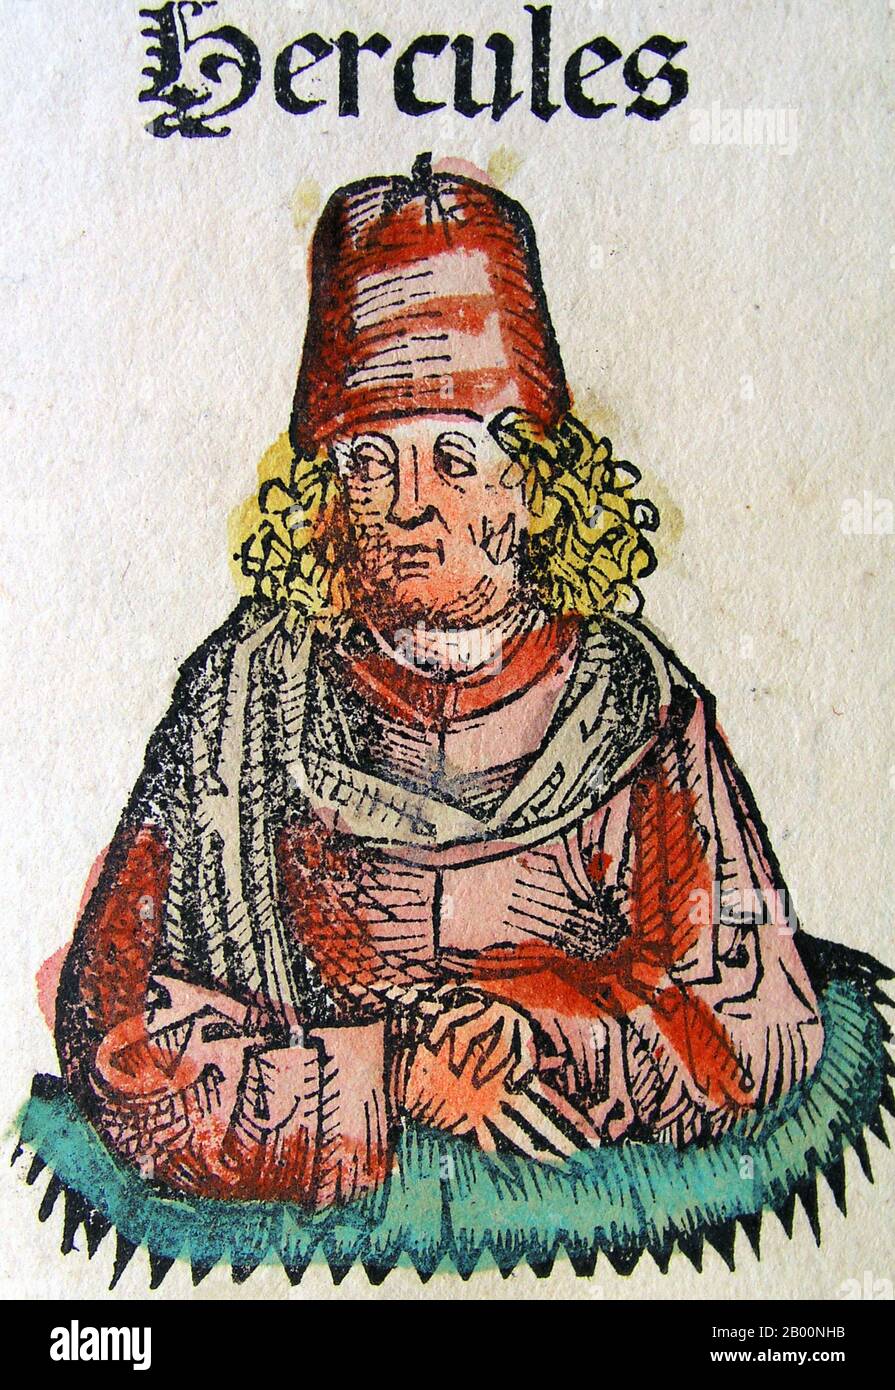 Germany: 'Hercules'. The Nuremberg Chronicle, by Hartmann Schedel (1440-1514), 1493.  The Nuremberg Chronicle is an illustrated world history. Its structure follows the story of human history as related in the Bible, including the histories of a number of important Western cities. Written in Latin by Hartmann Schedel, with a version in German translation by Georg Alt, it appeared in 1493. It is one of the best-documented early printed books. It is classified as an incunabulum, a book, pamphlet, or broadside that was printed (not handwritten) before the year 1501 in Europe. Stock Photo